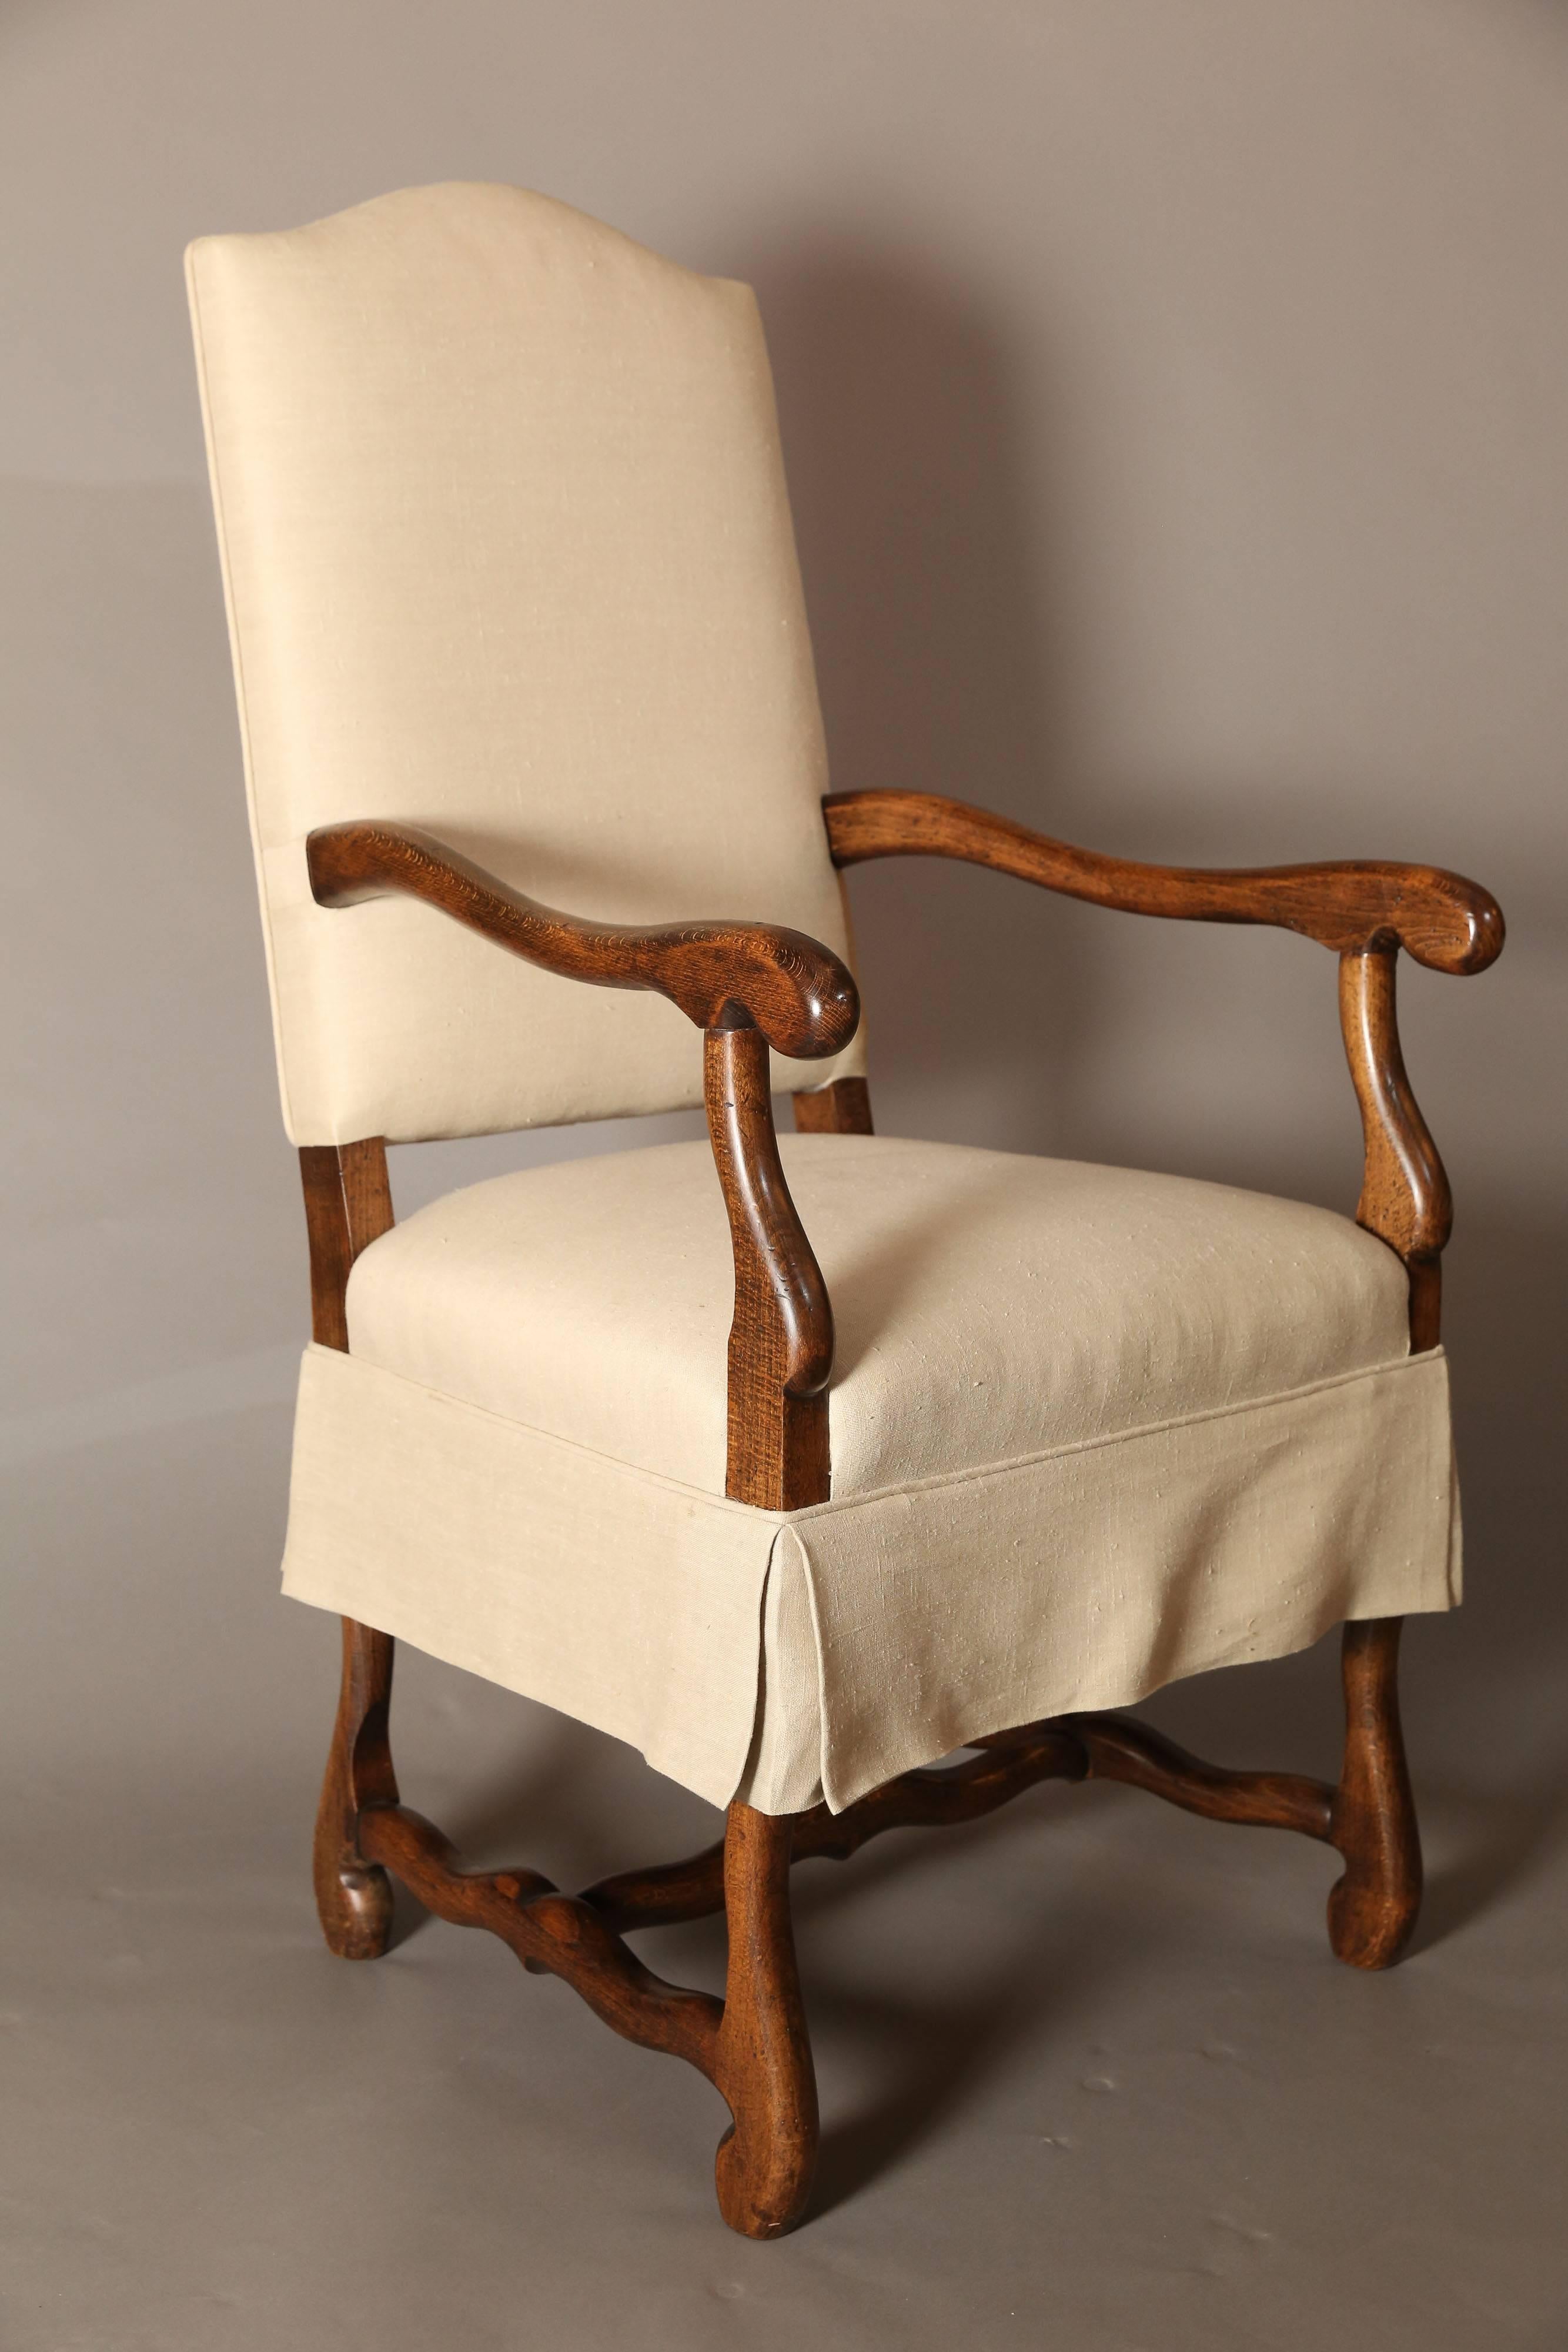 Fruitwood stained chair frames with handsome simple details.

White cotton slipcovers drop below seats and most of back.

 